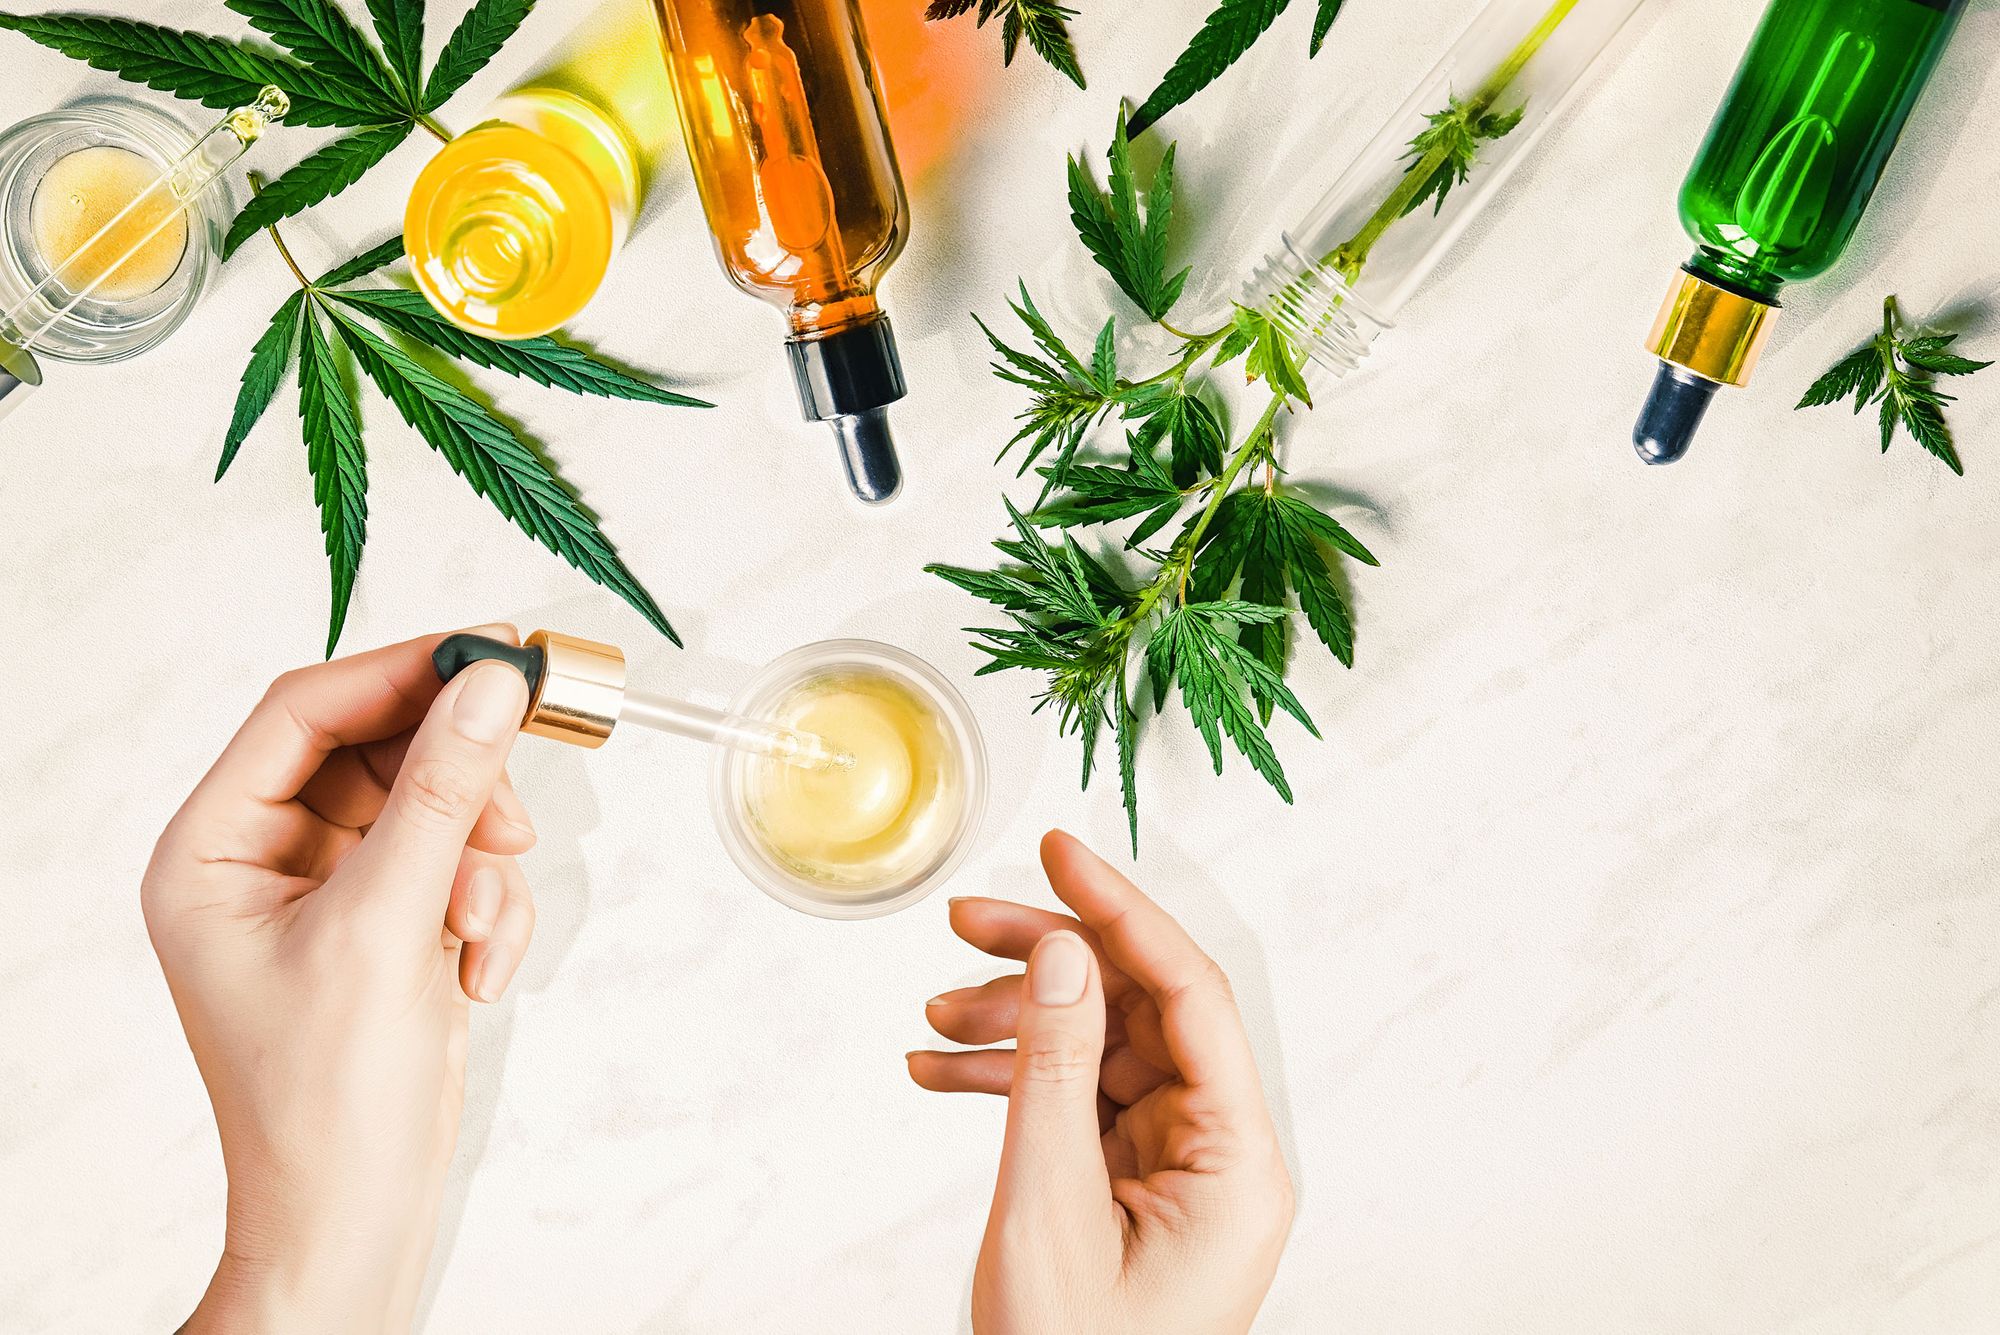 various-glass-bottles-with-cbd-oil-thc-tincture-hemp-leaves-cosmetics-cbd-oil-female-hands-holding-pipette-with-cbd-cosmetic-oil.jpg